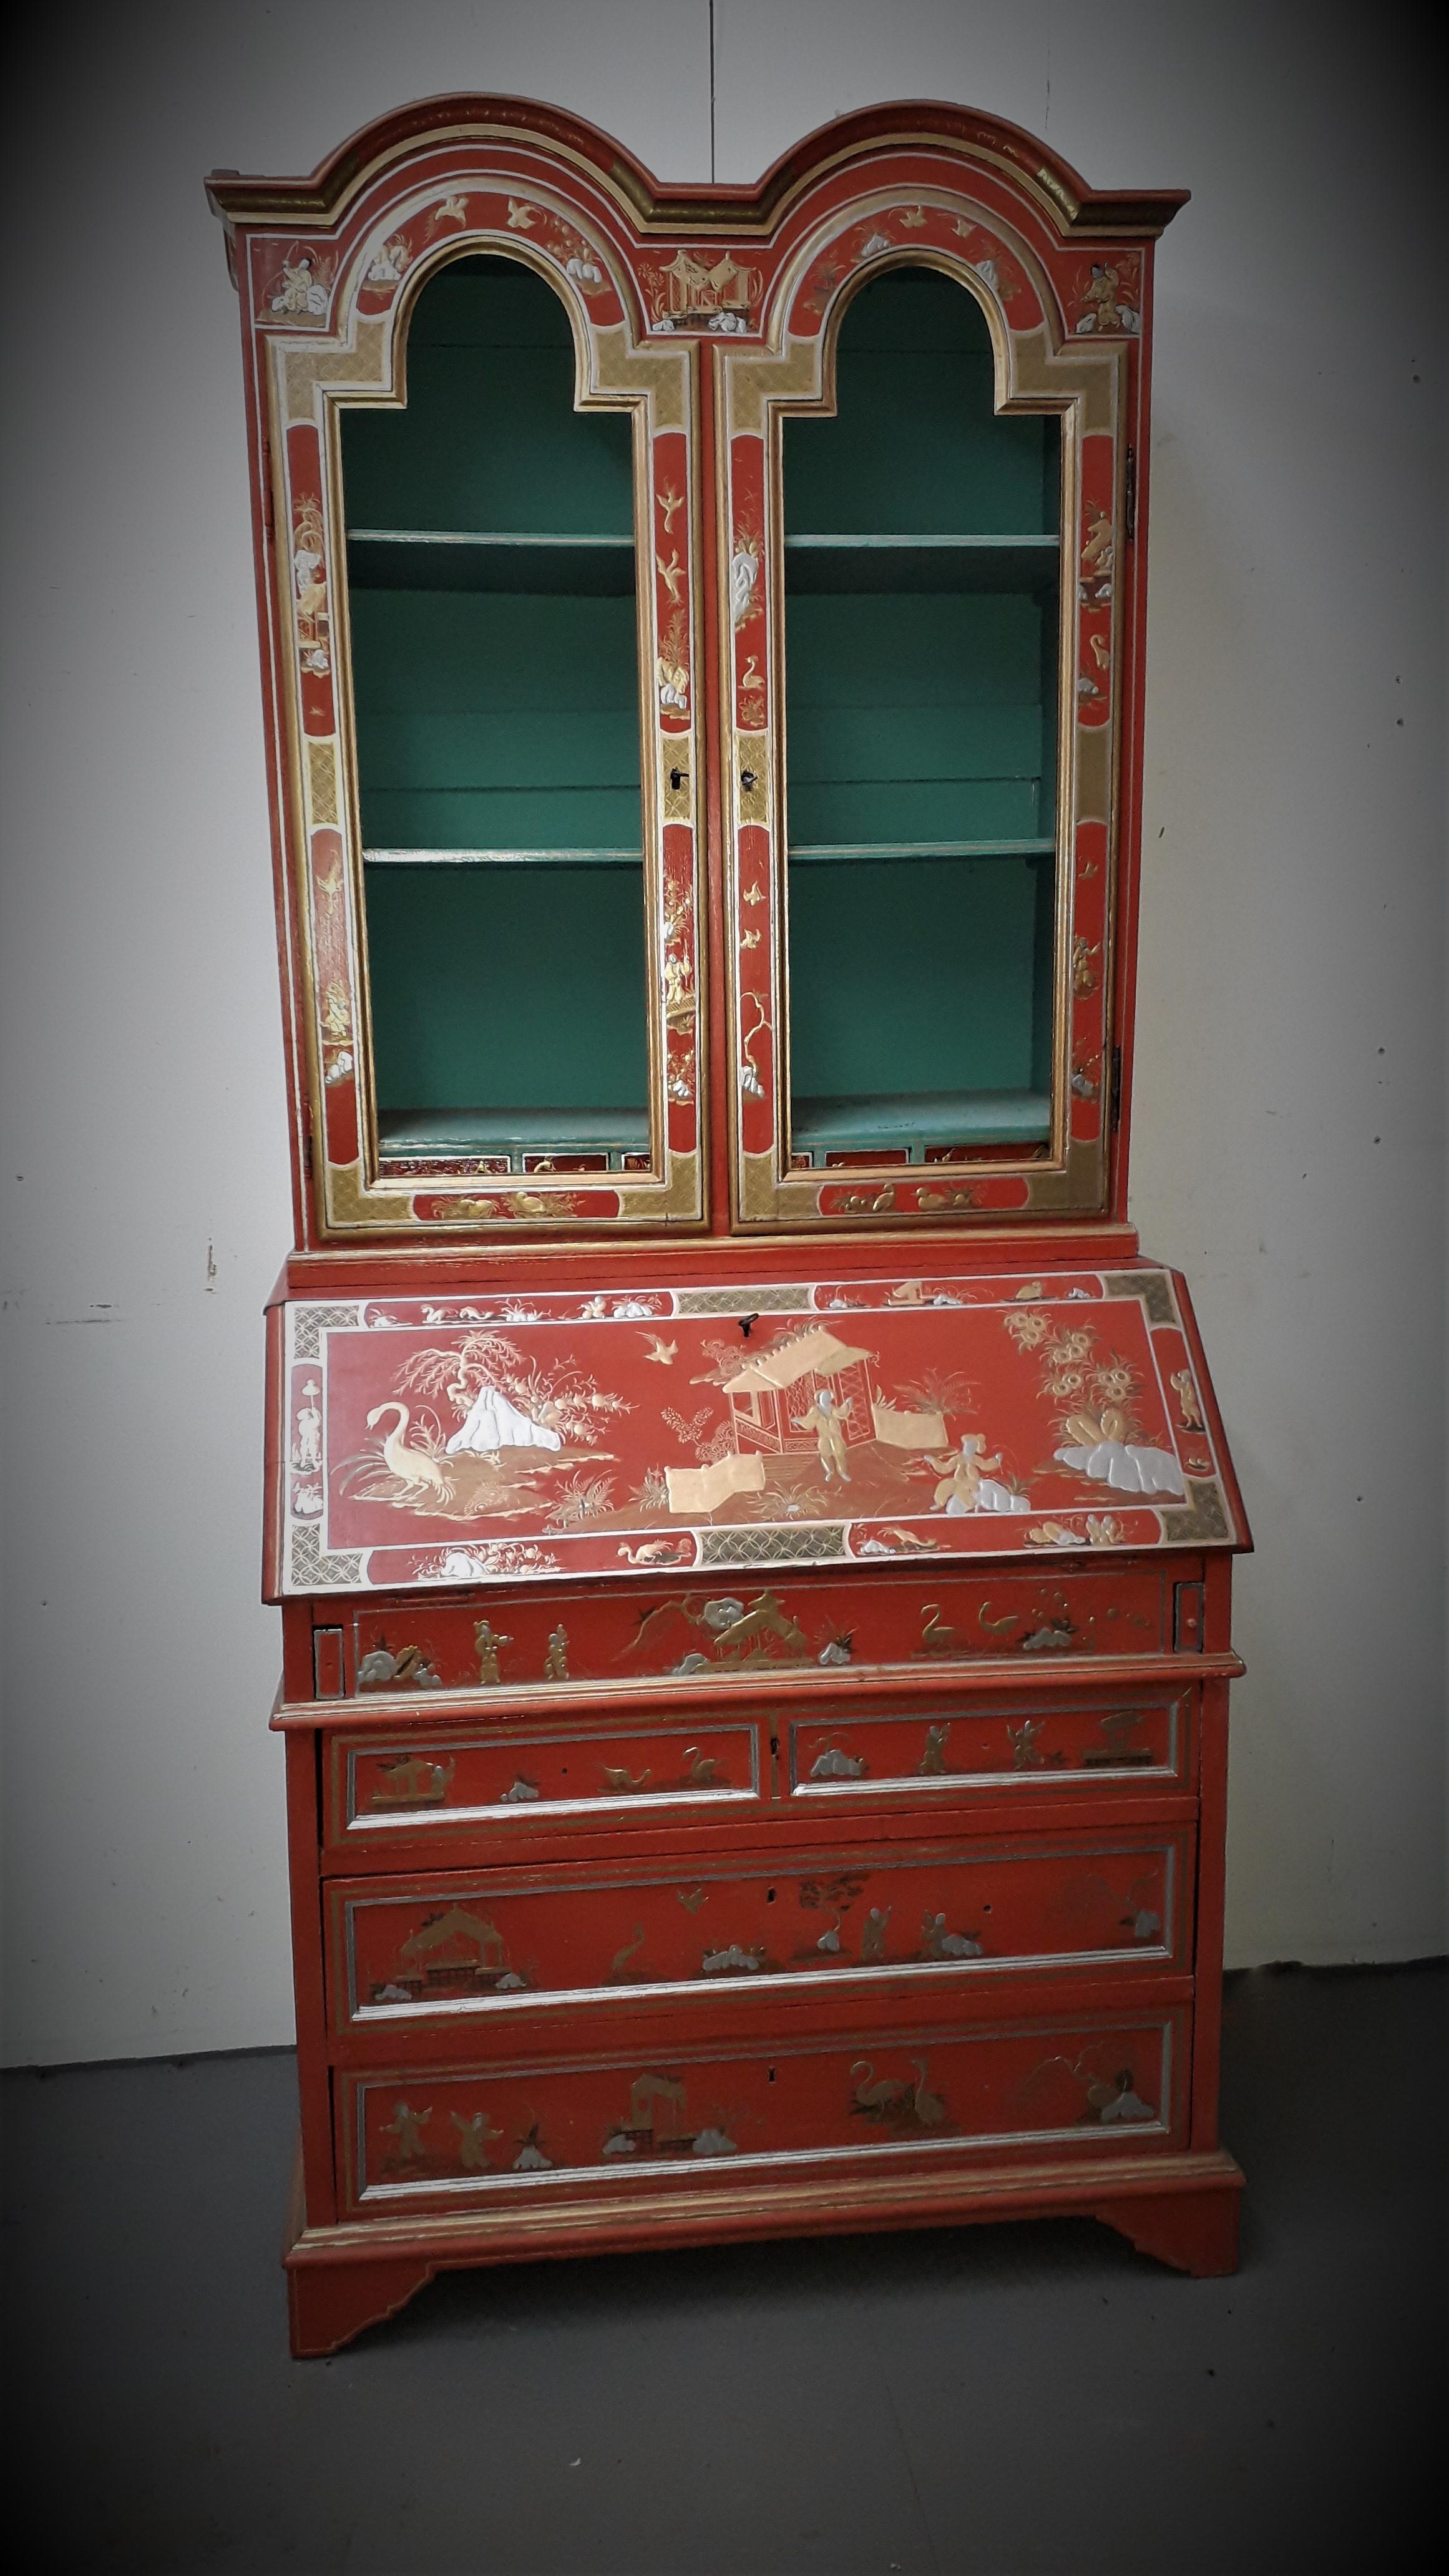 18th Century style Chinoiserie Red Lacquer Bureau Bookcase (William und Mary)